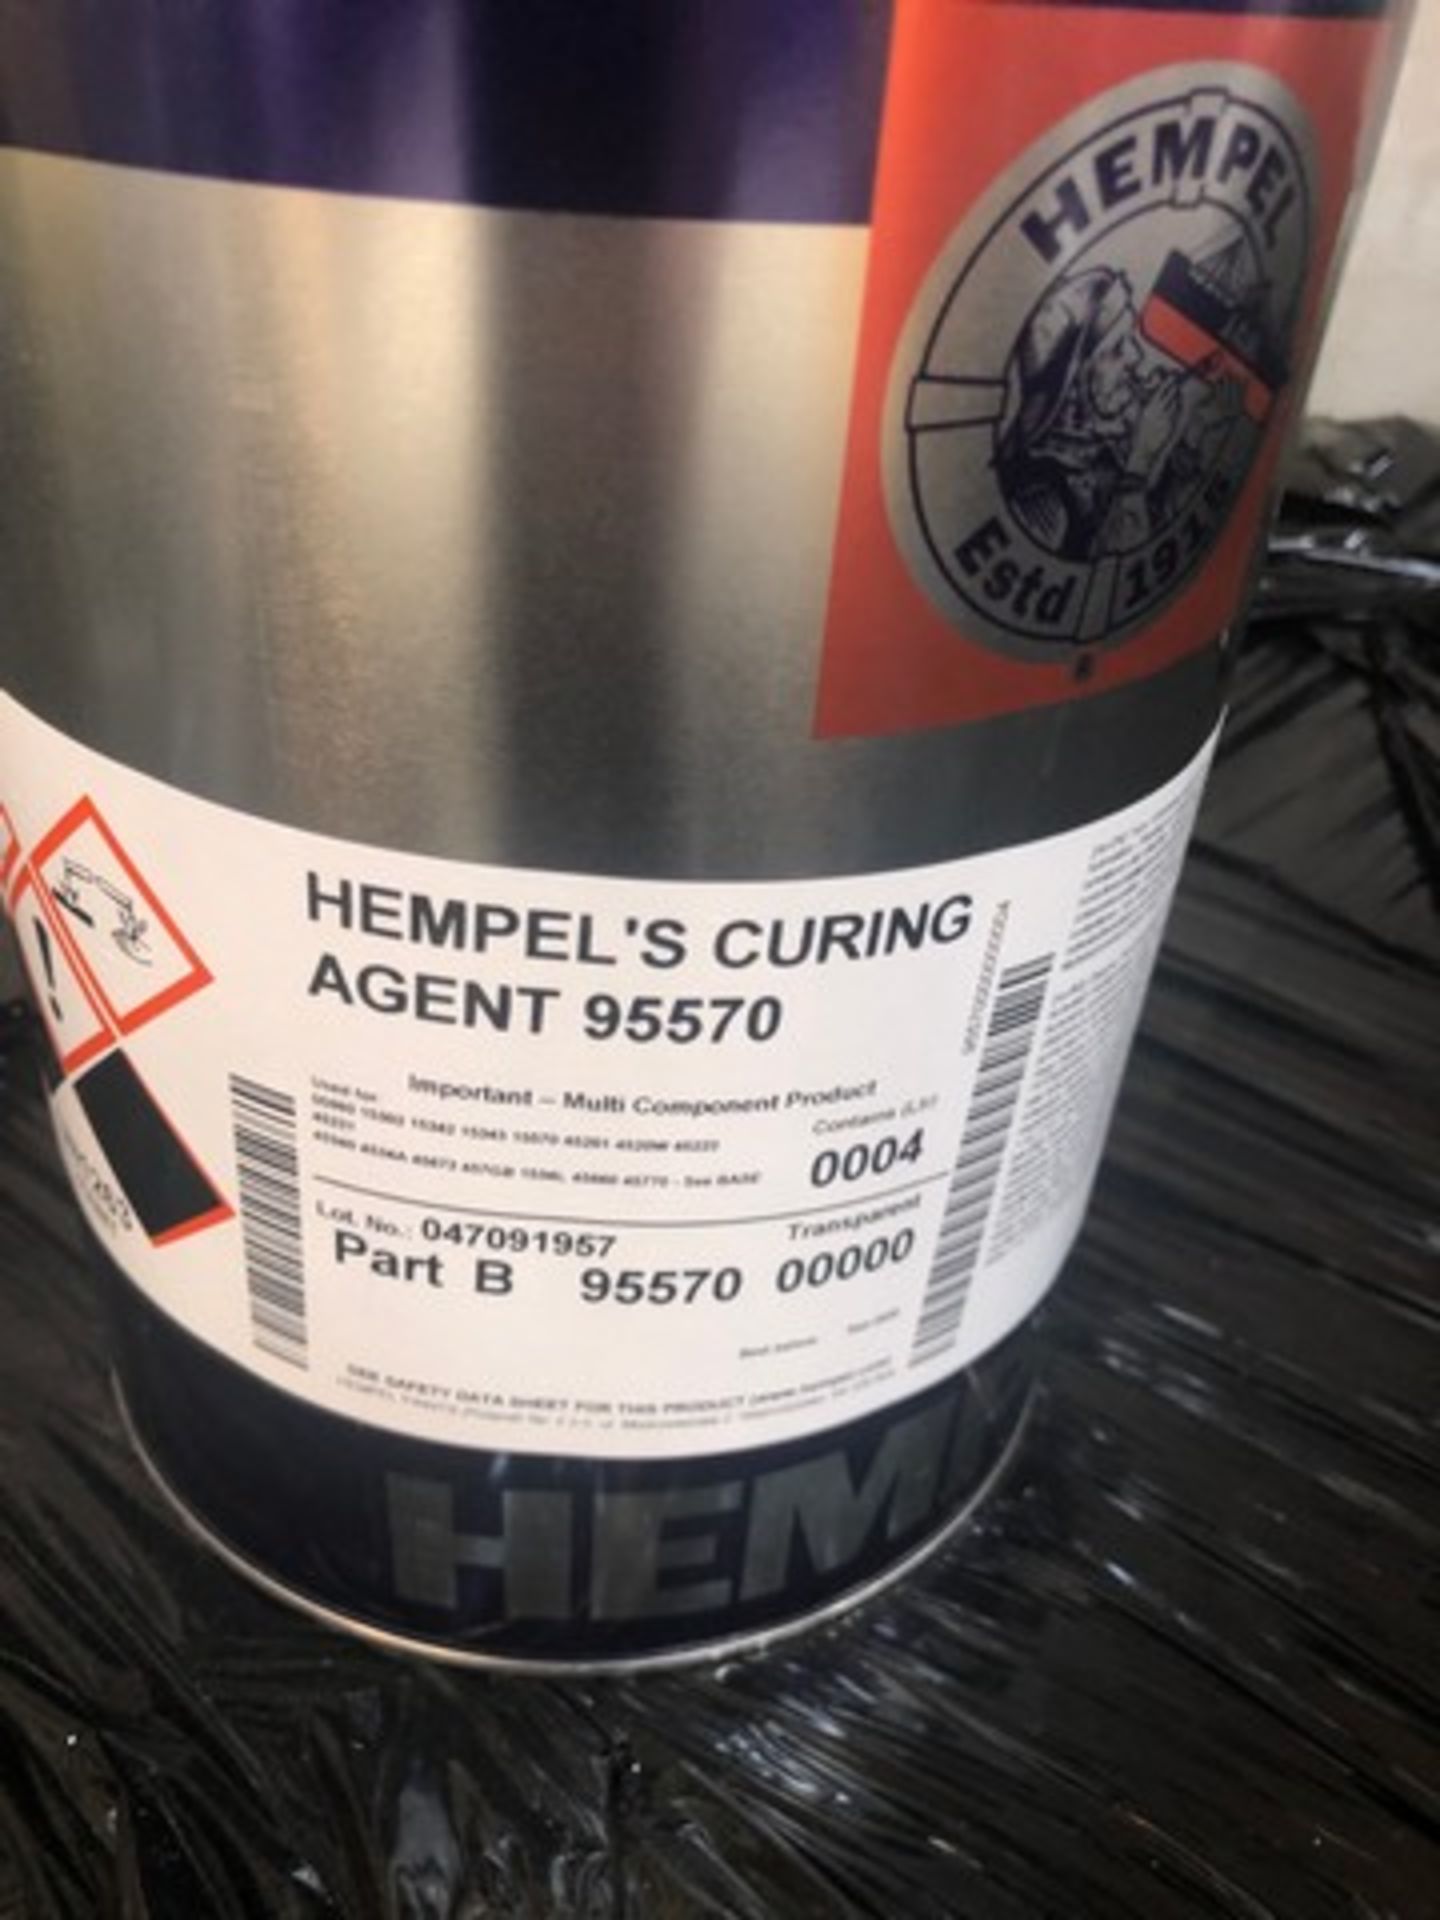 Pallet of Hempel curing agent 95570 approx 30 tins - Image 2 of 2